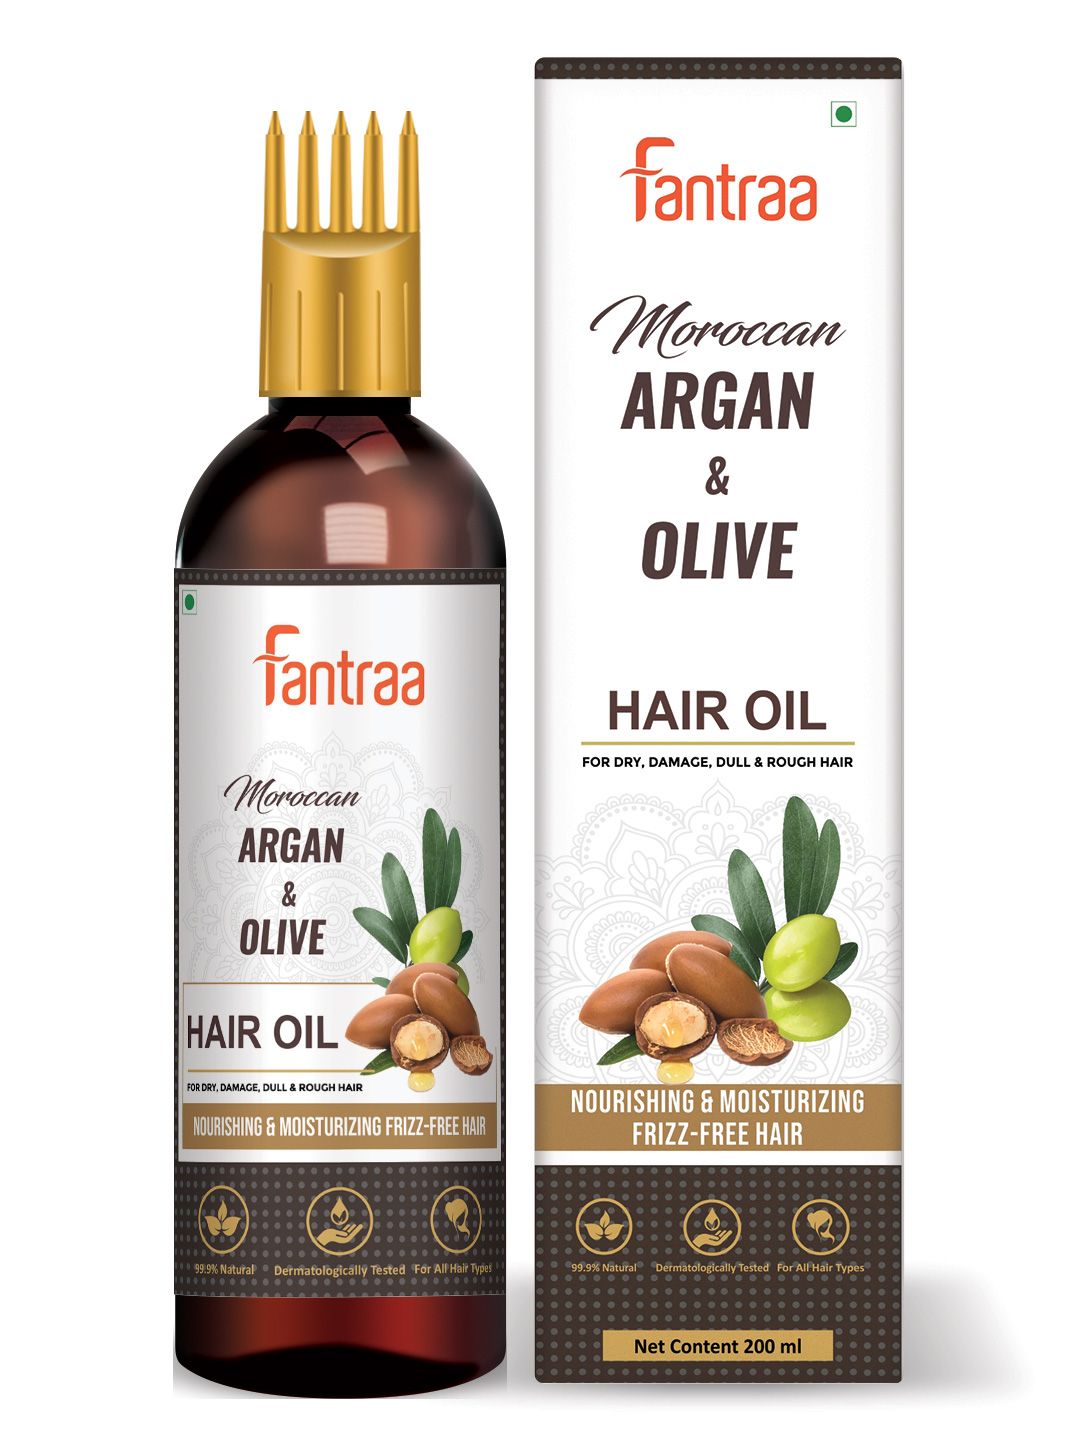 Fantraa Moroccan Argan & Olive Frizz-Free Hair Oil - 200 ml Price in India